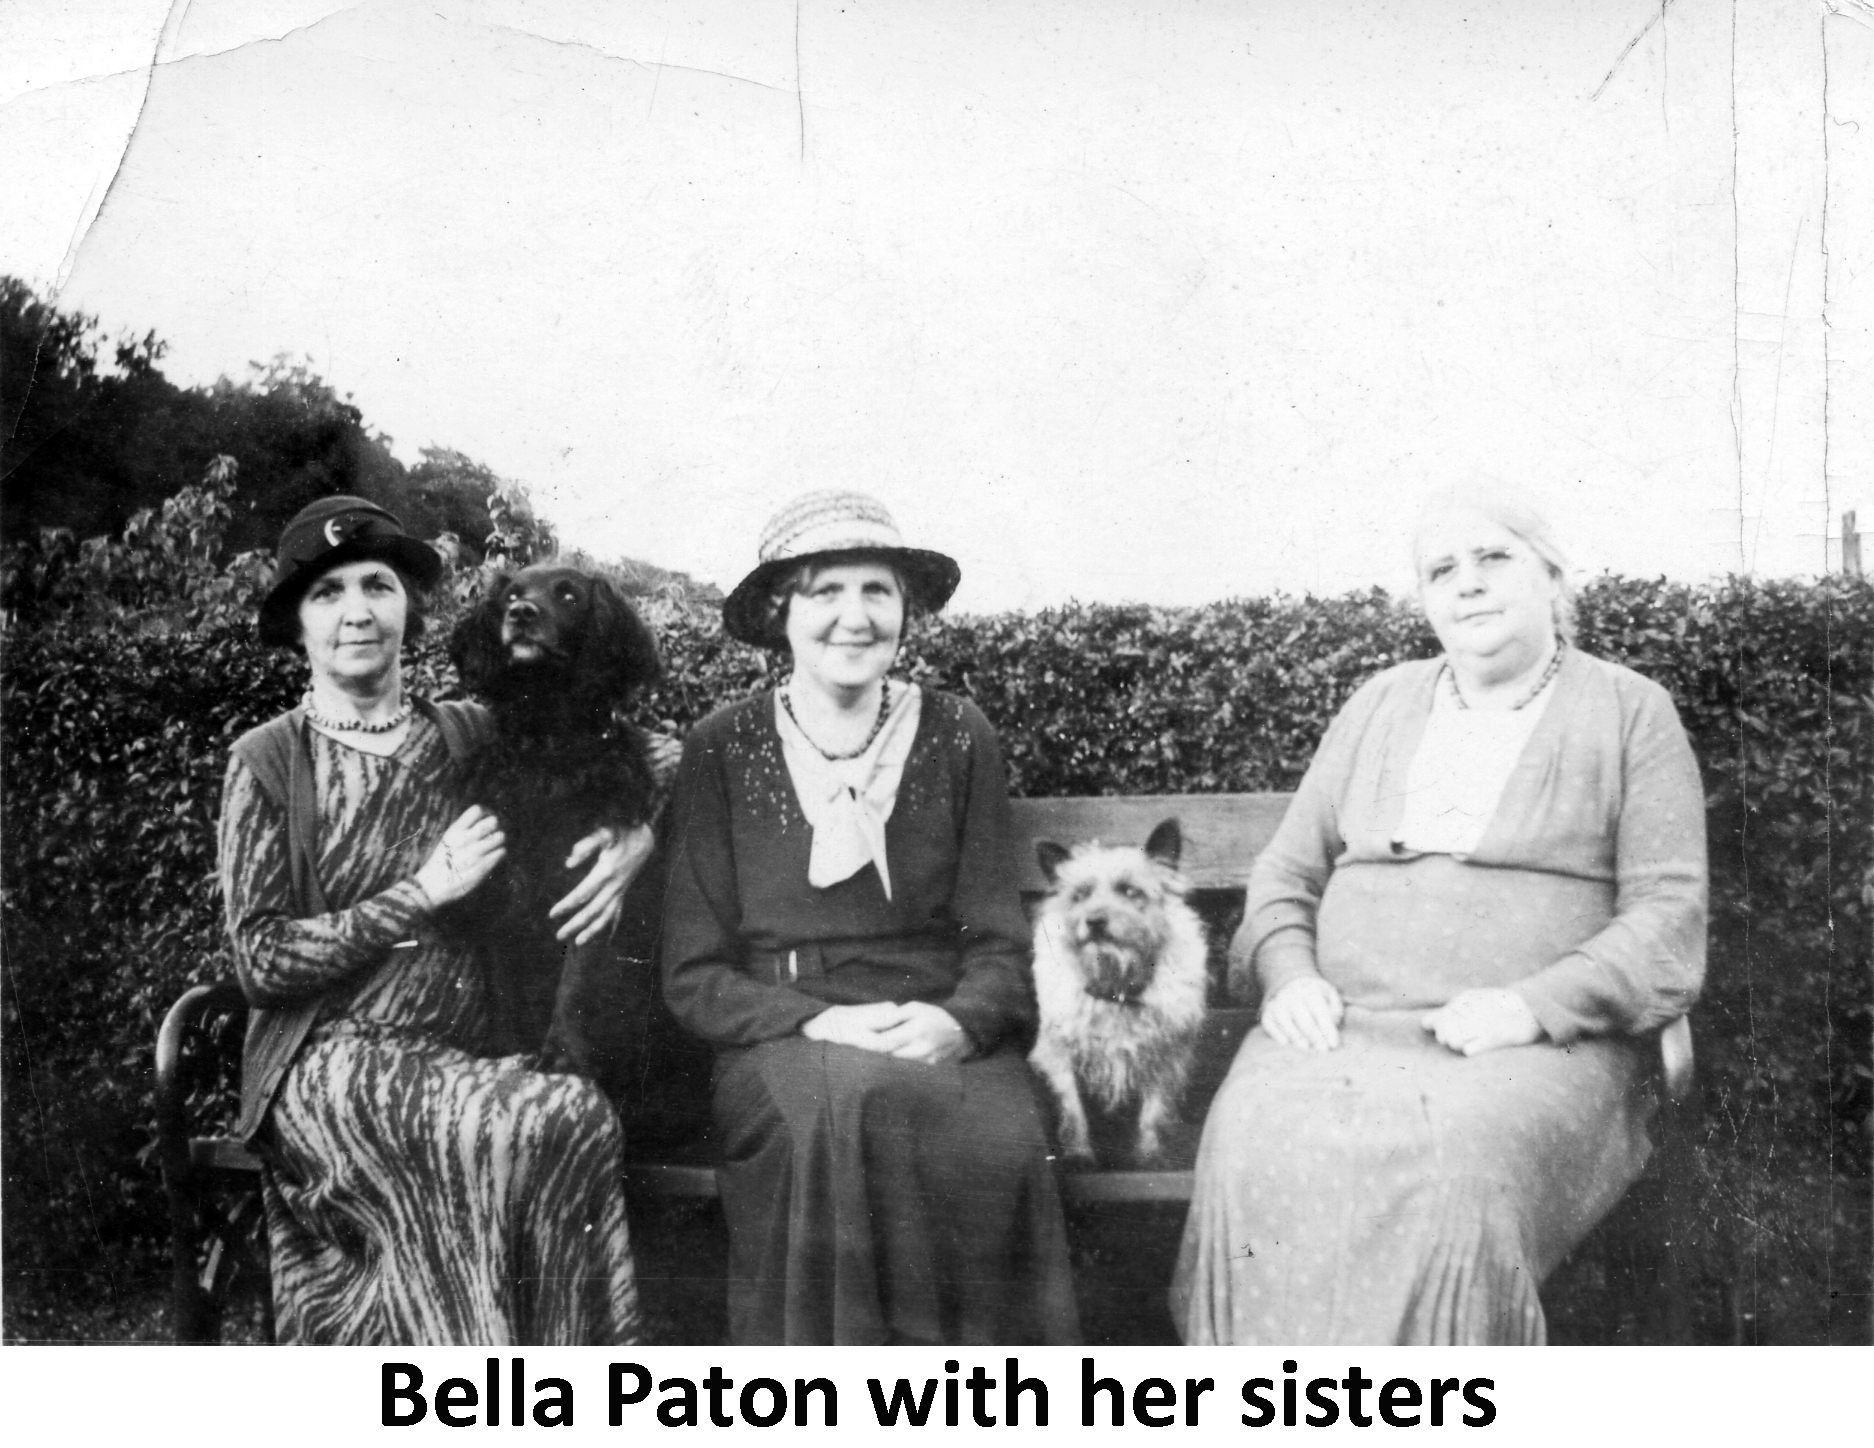 The Johnston sisters - Kate, Nettie, and Isabella